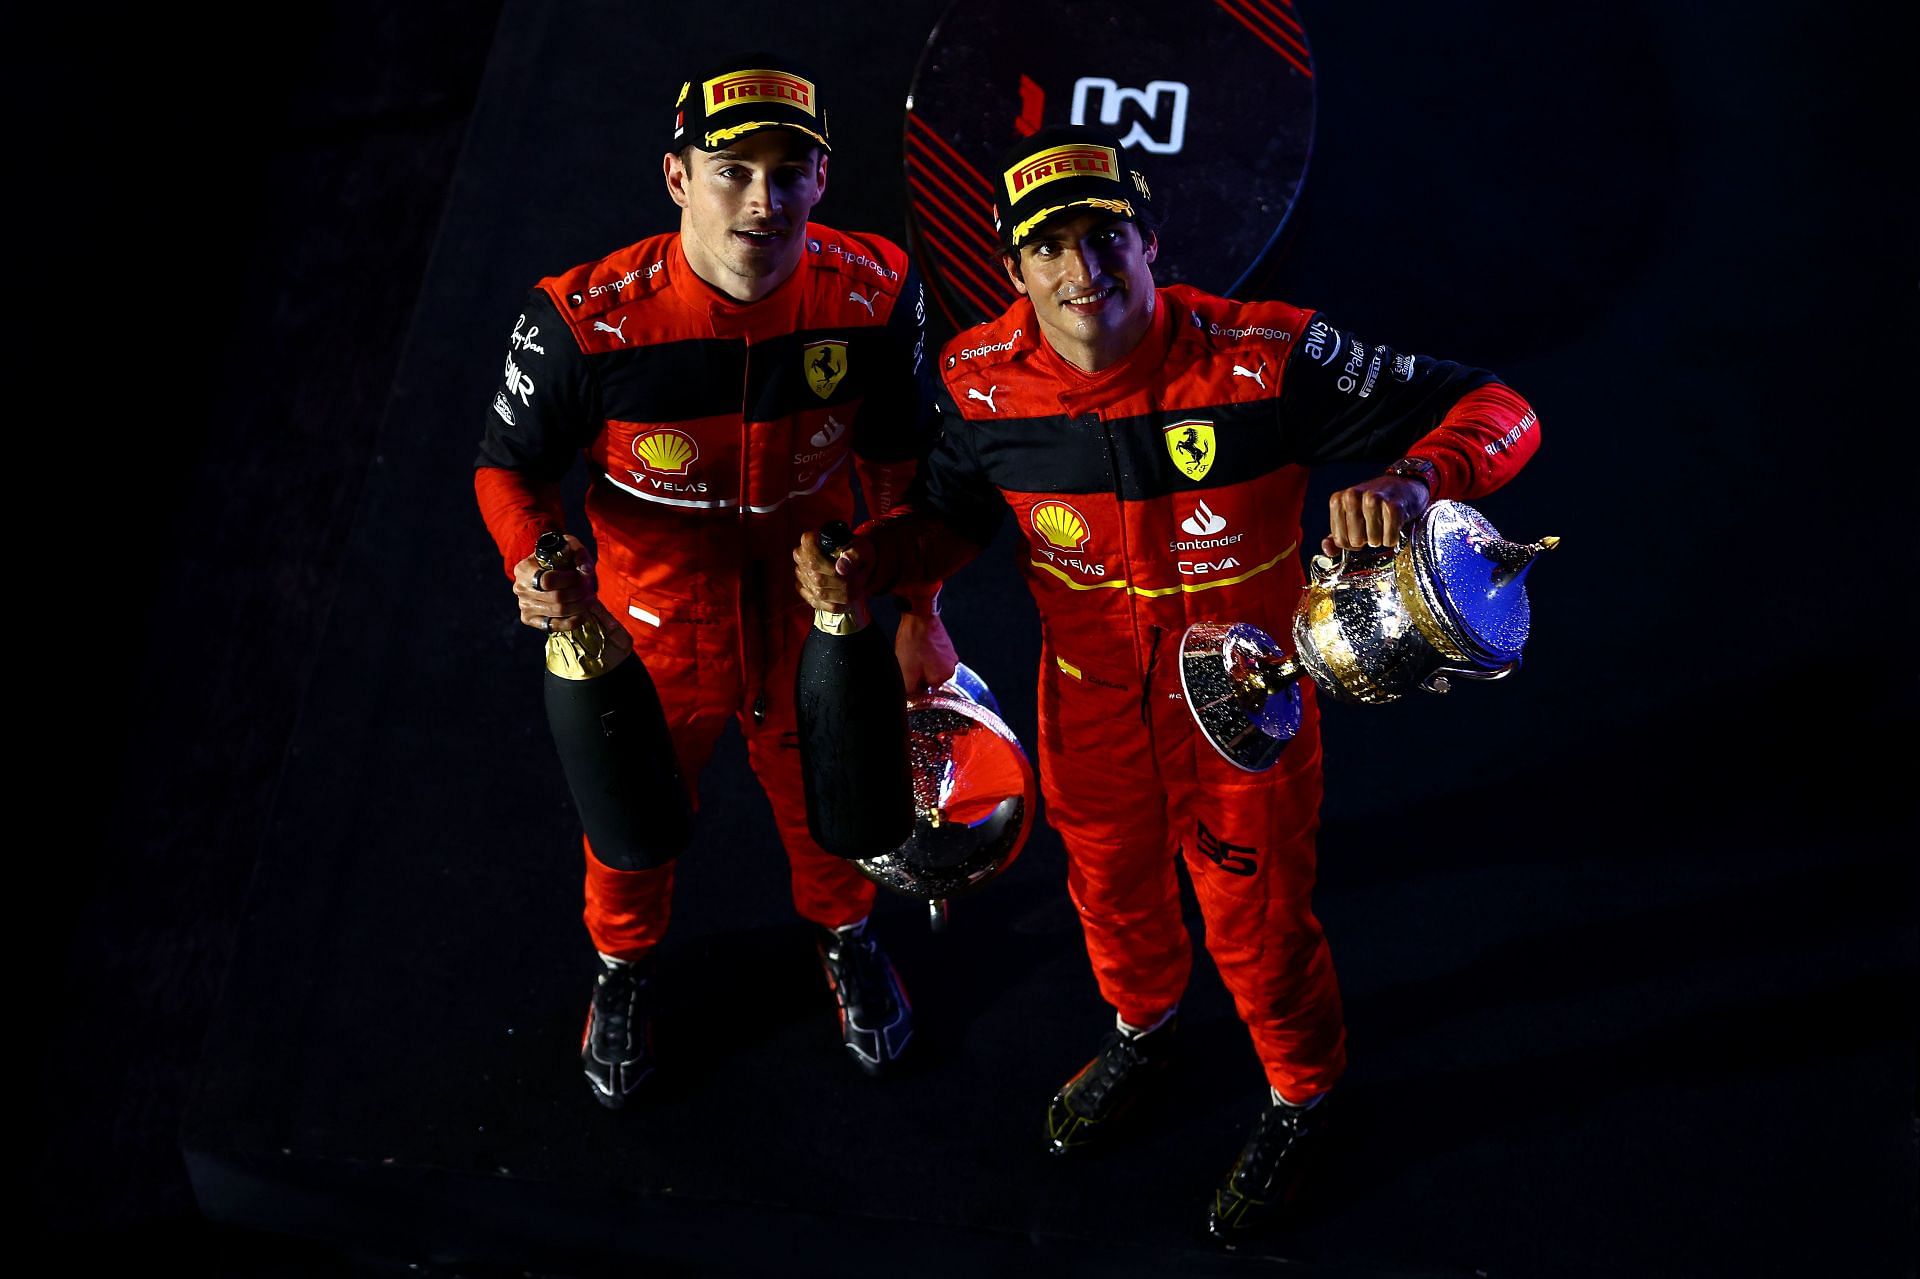 Ferrari drivers Charles Leclerc (left) and Carlos Sainz (right) after their one-two finish at the 2022 F1 Bahrain GP (Photo by Mark Thompson/Getty Images)